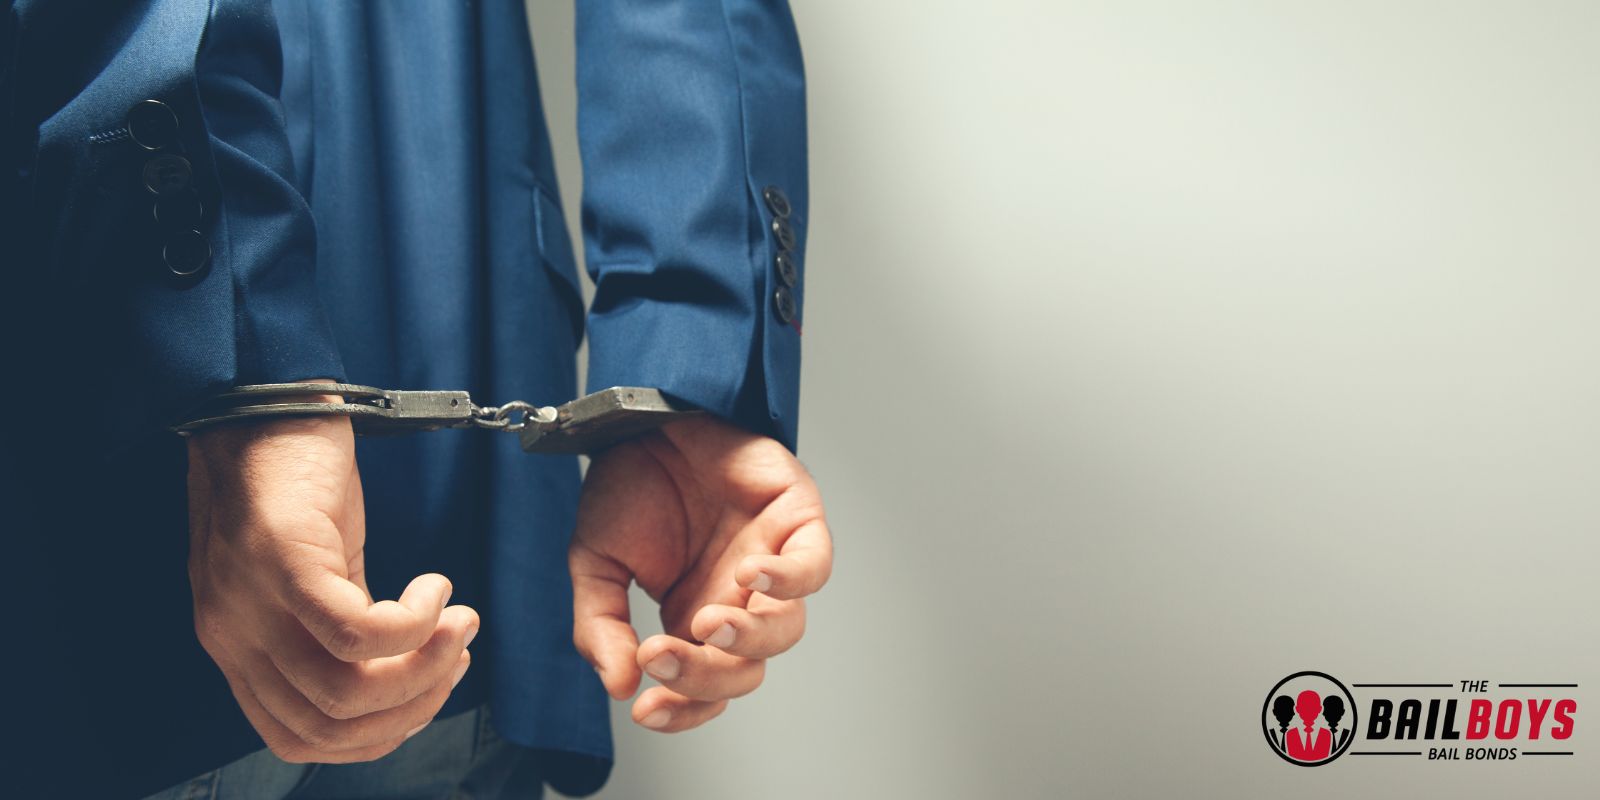 violating restraining orders can land you in jail